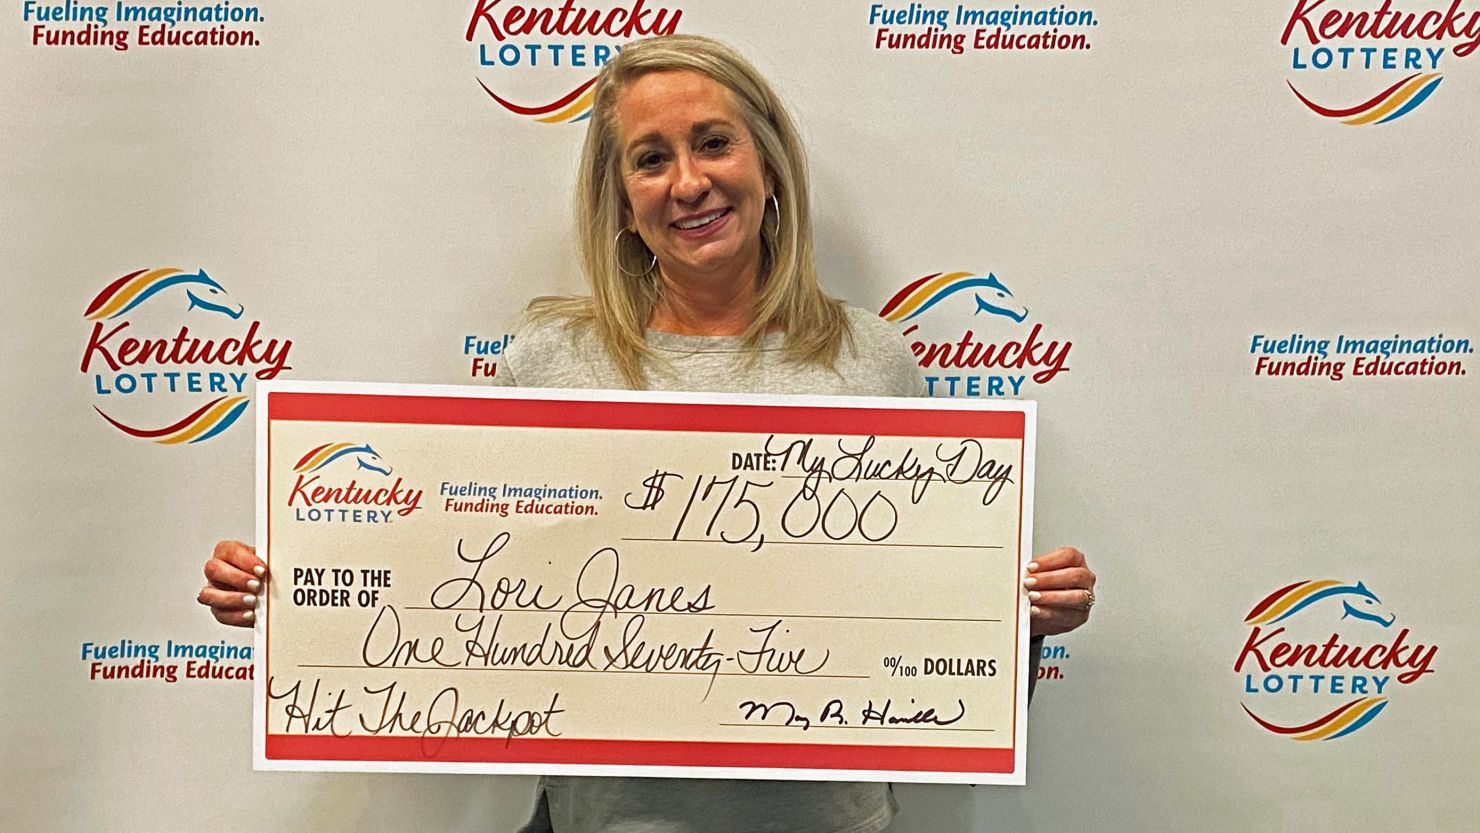 Lori Janes won a $175,000 Kentucky Lottery prize after taking home $25 worth of lottery tickets at her office gift exchange.